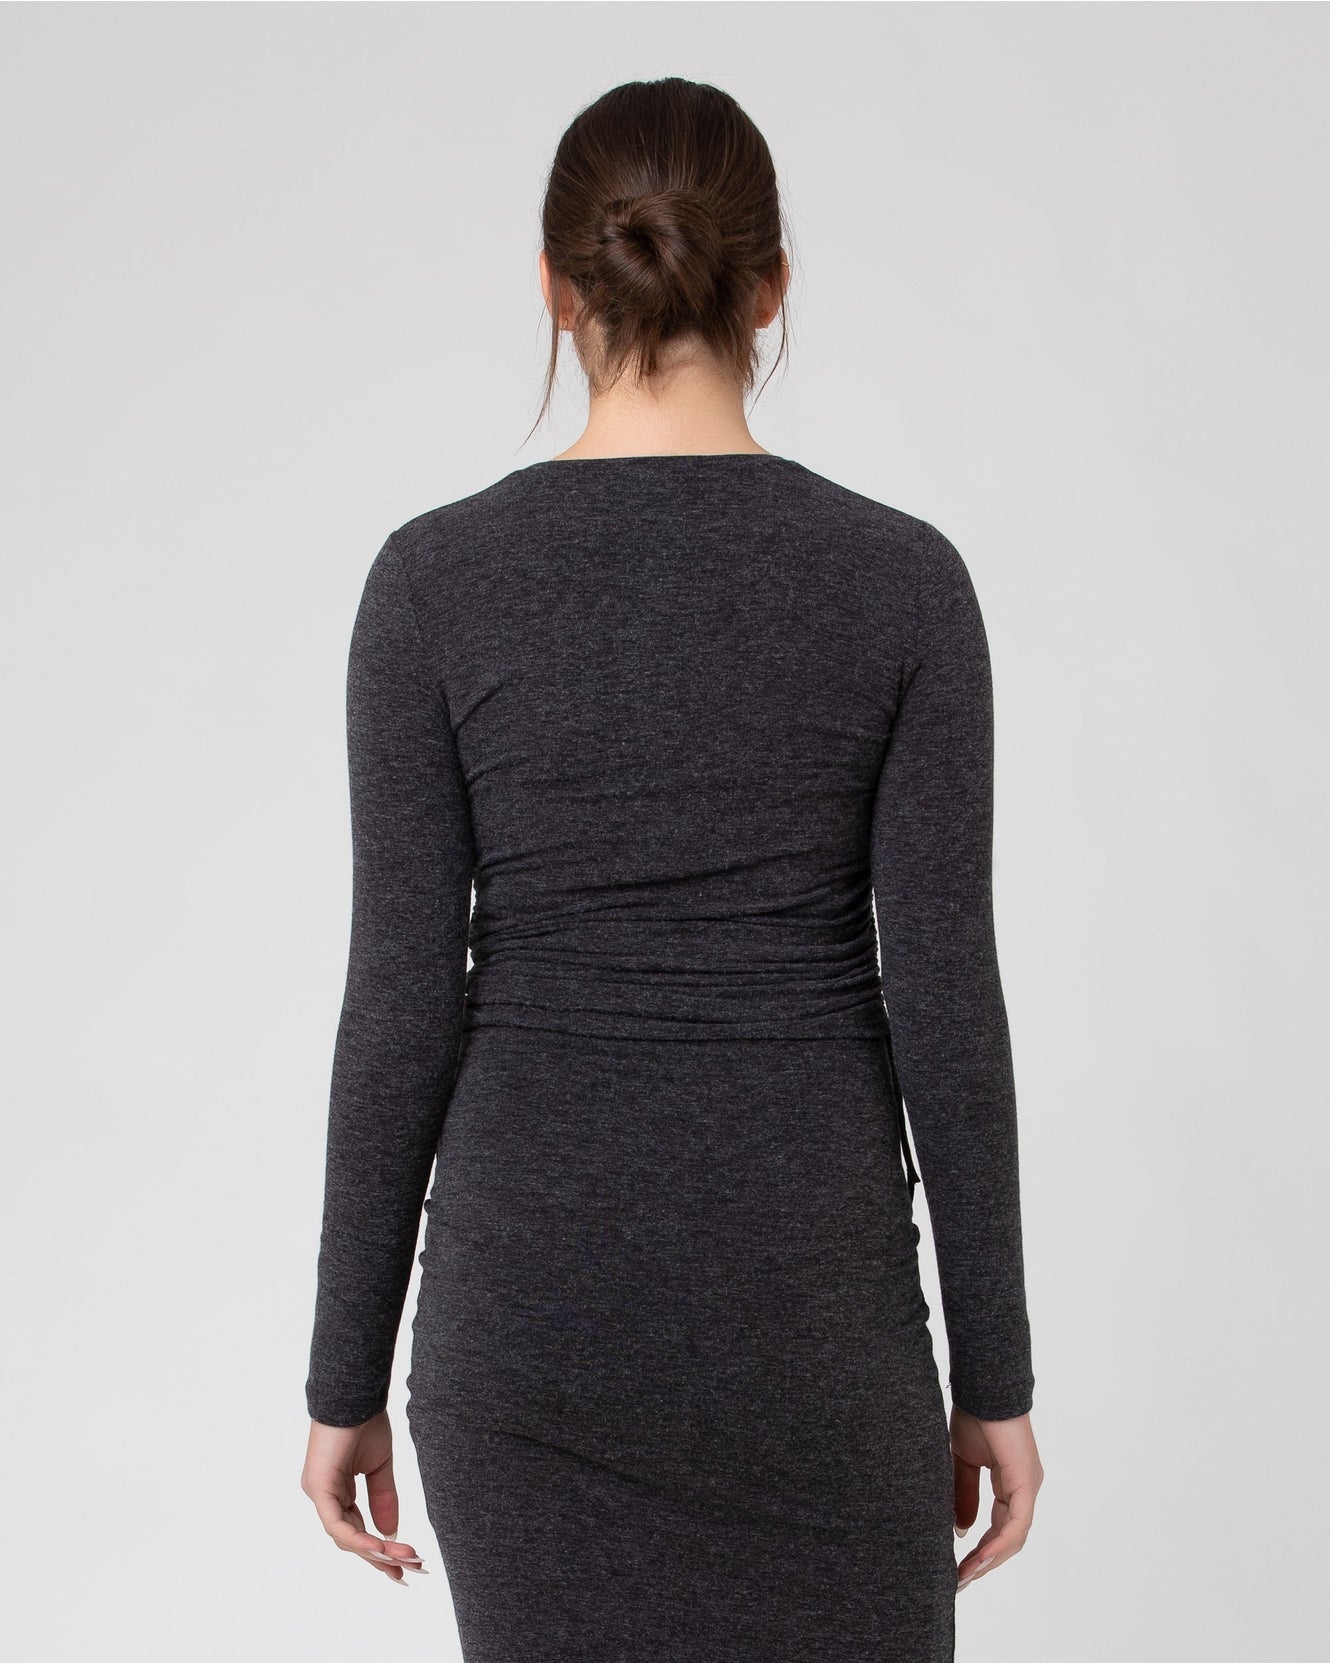 Ruched Long Sleeve Top - Charcoal